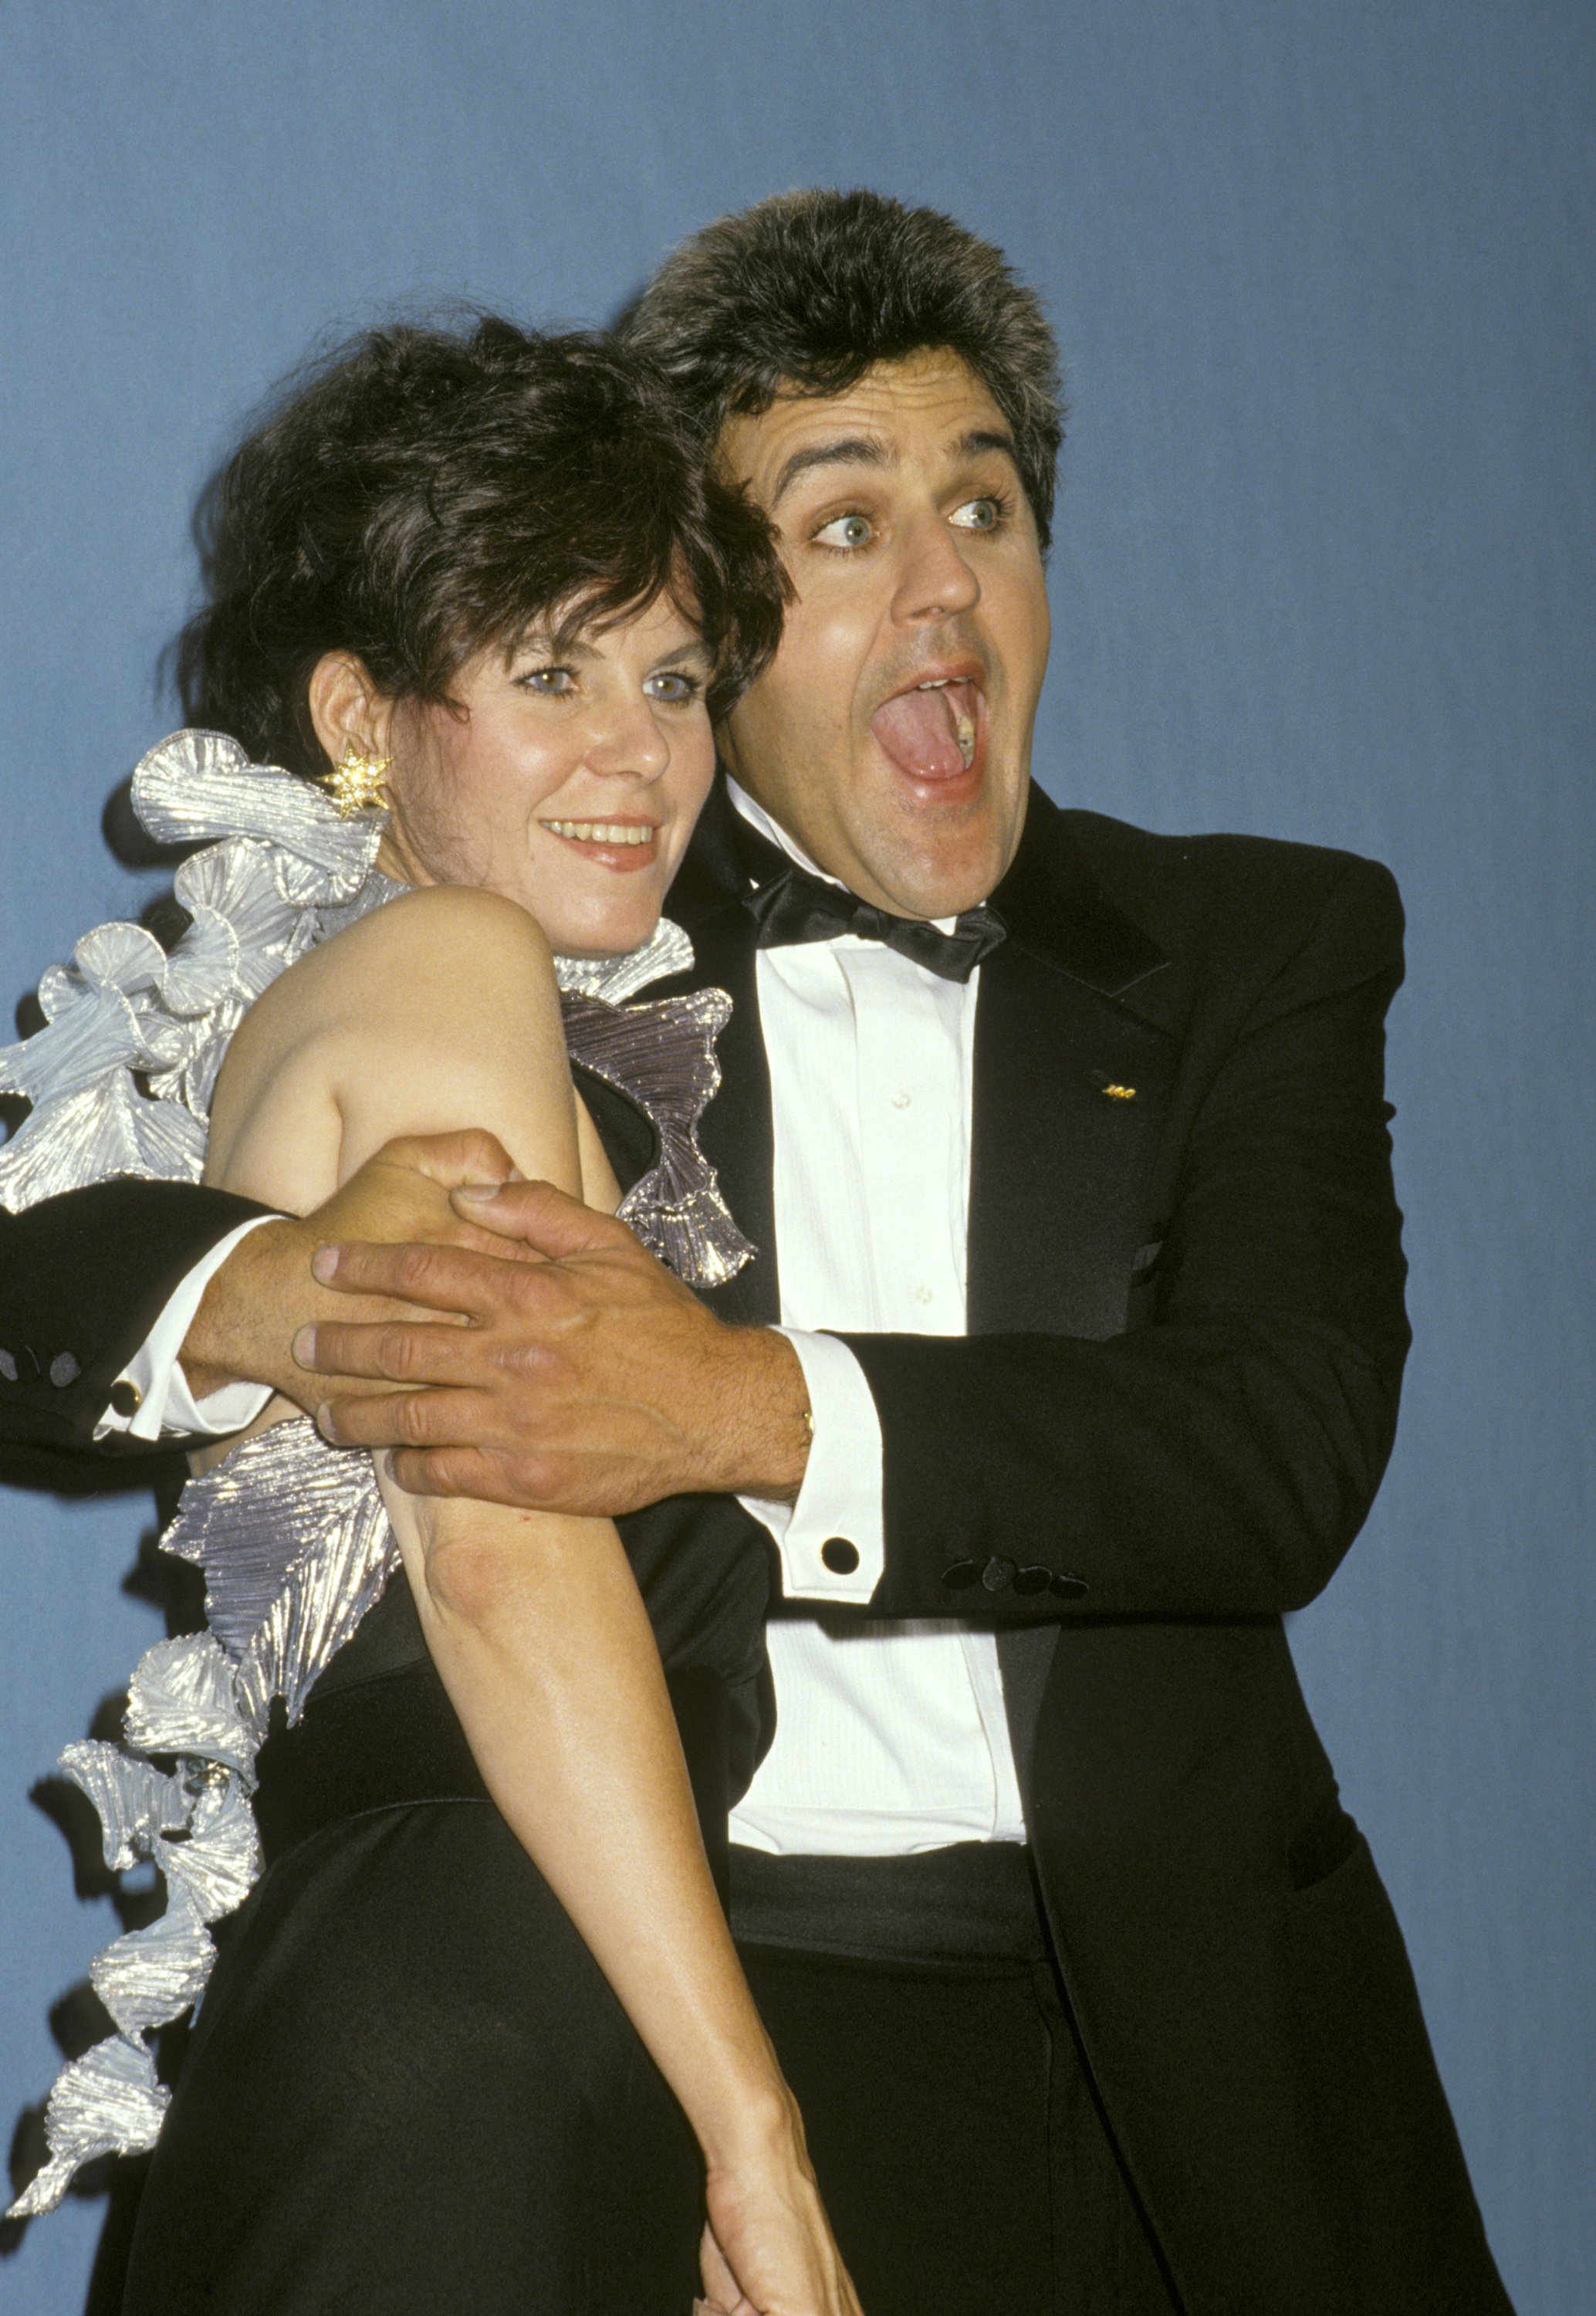 Mavis Leno and Jay Leno during 39th Annual Emmy Awards - September 20, 1987 at Pasadena Civic Auditorium in Pasadena, California, United States. | Source: Getty Images